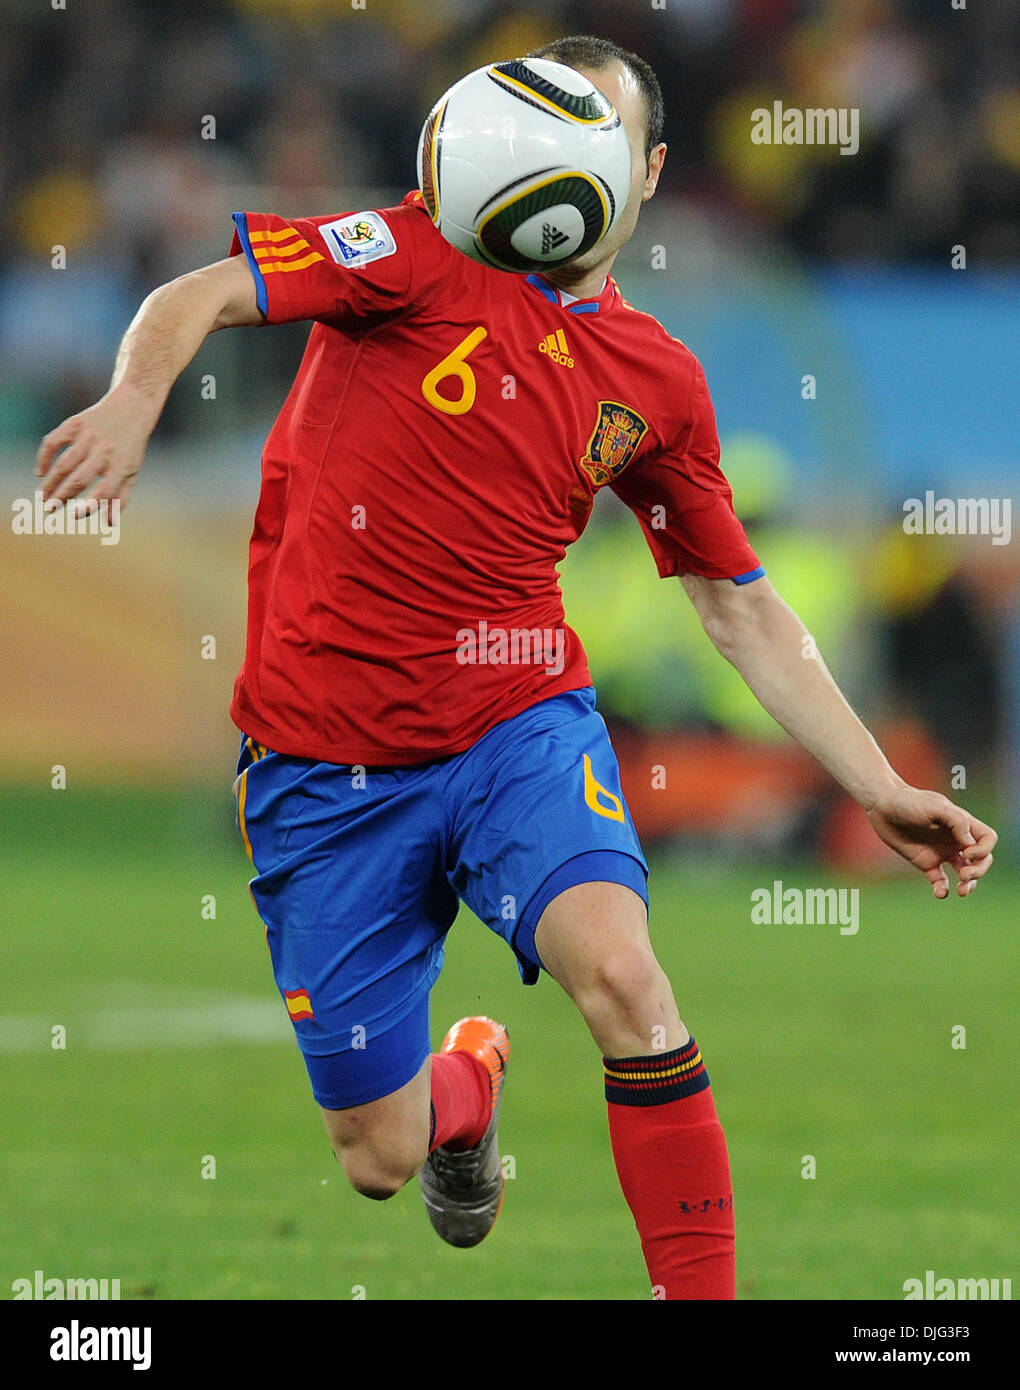 July 07, 2010 - Durban, South Africa - Andres Iniesta of Spain in action during the 2010 FIFA World Cup Semi Final soccer match between Germany and Spain at Princess Magogo Stadium on July 7, 2010 in Durban, South Africa. (Credit Image: © Luca Ghidoni/ZUMApress.com) Stock Photo